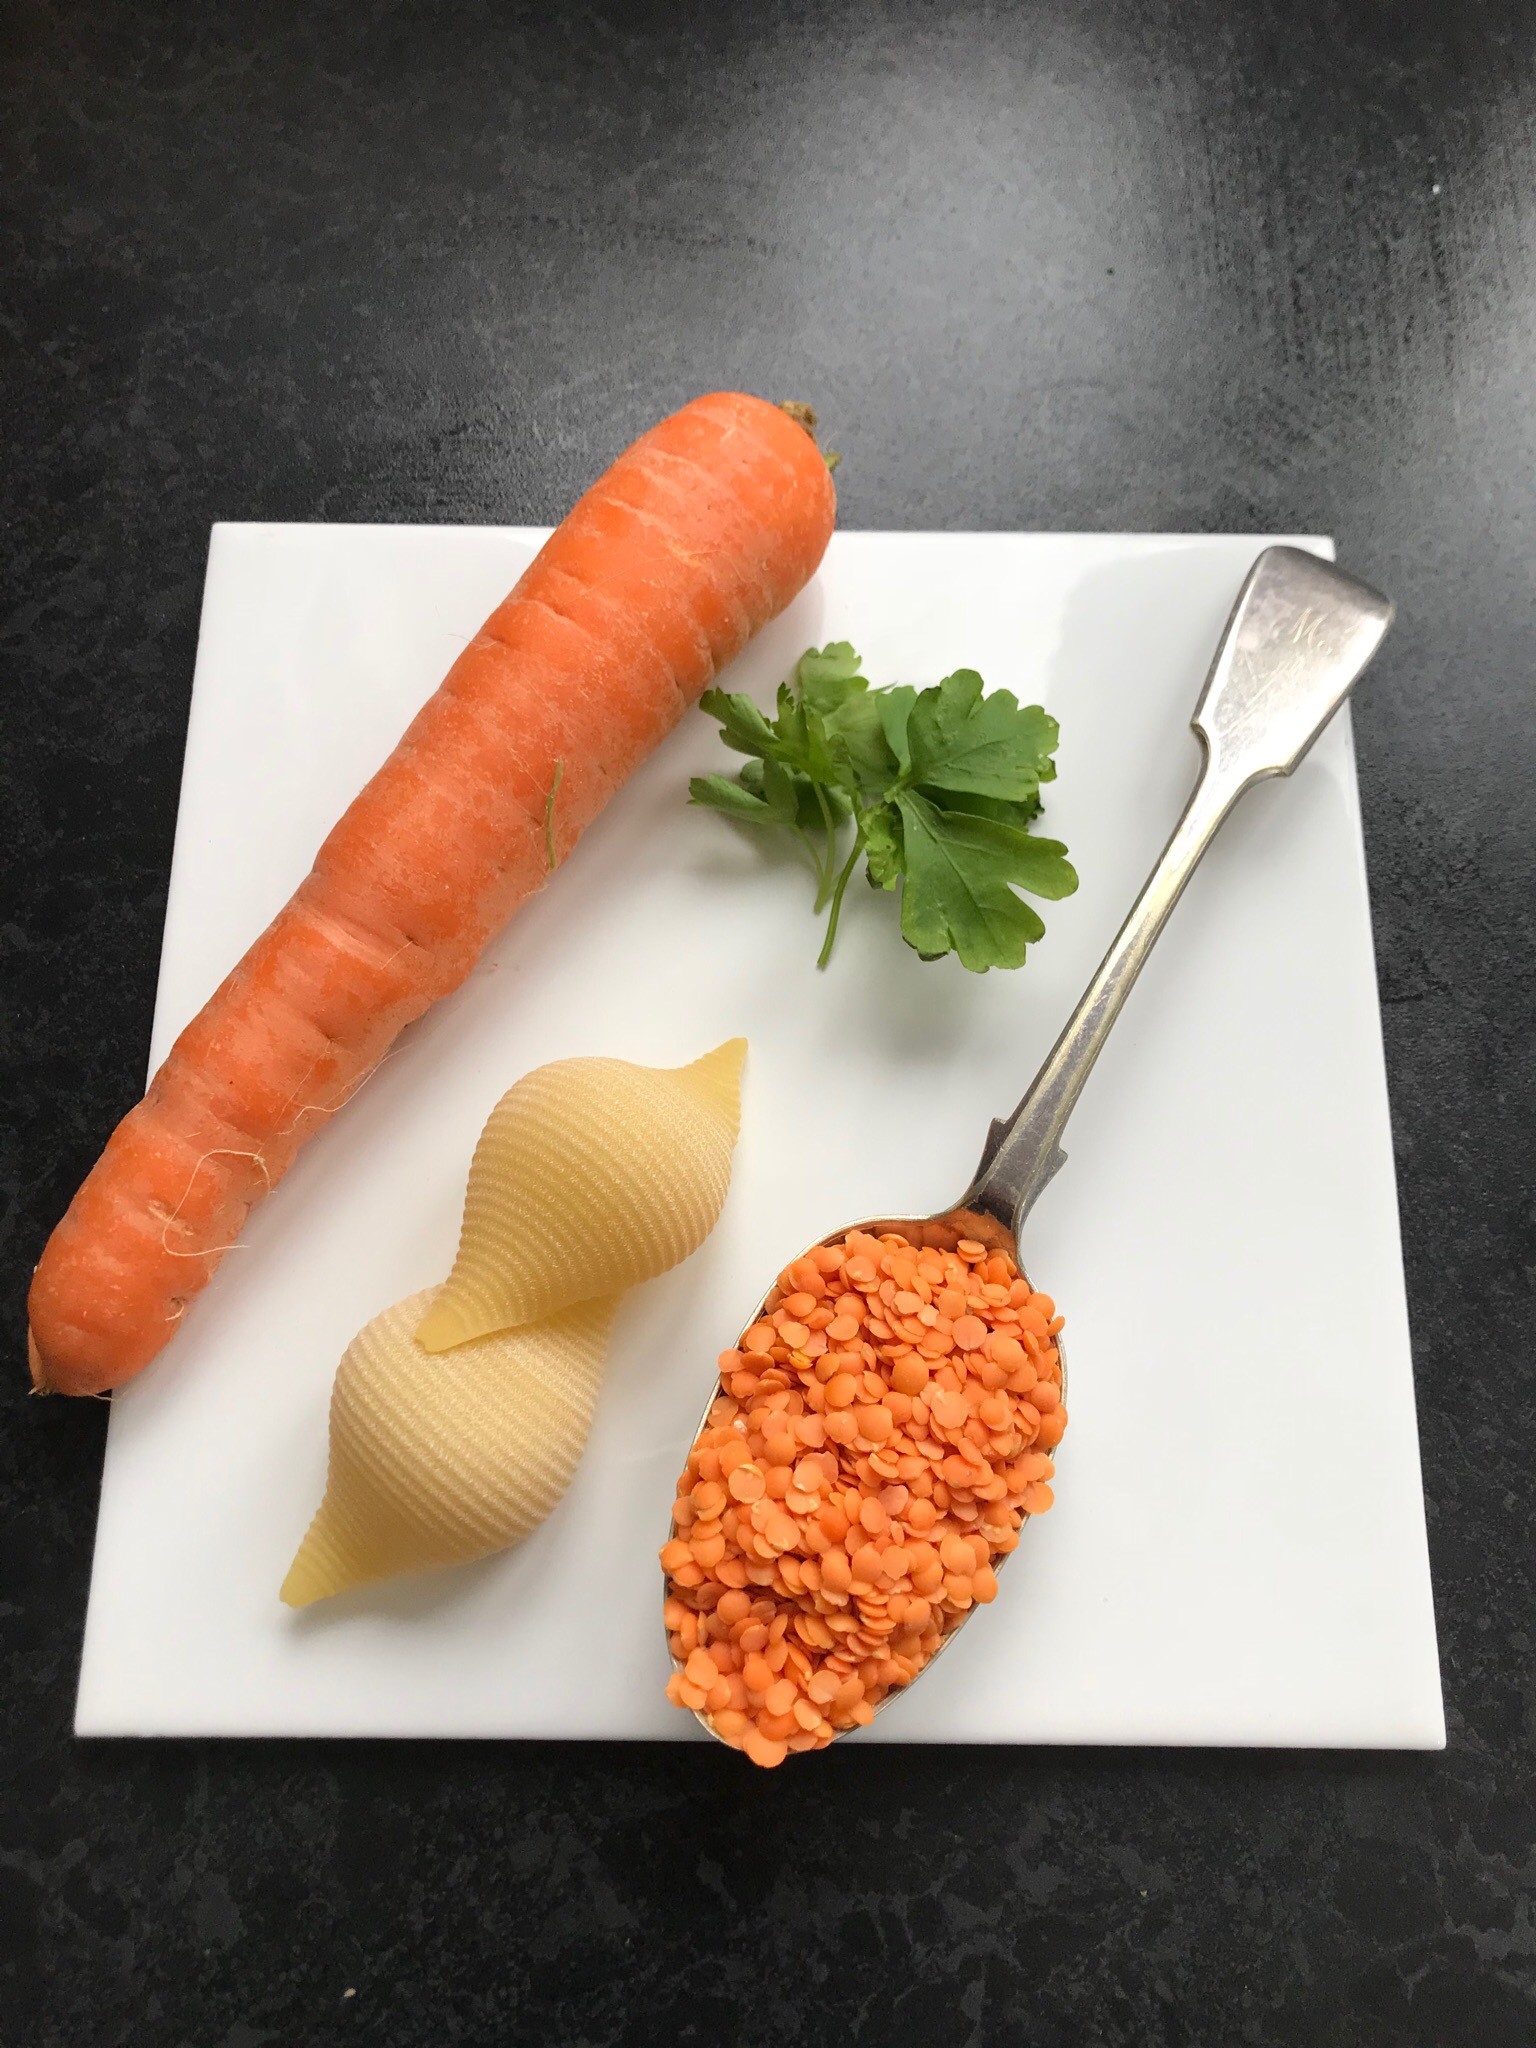 Red lentil and carrot puree